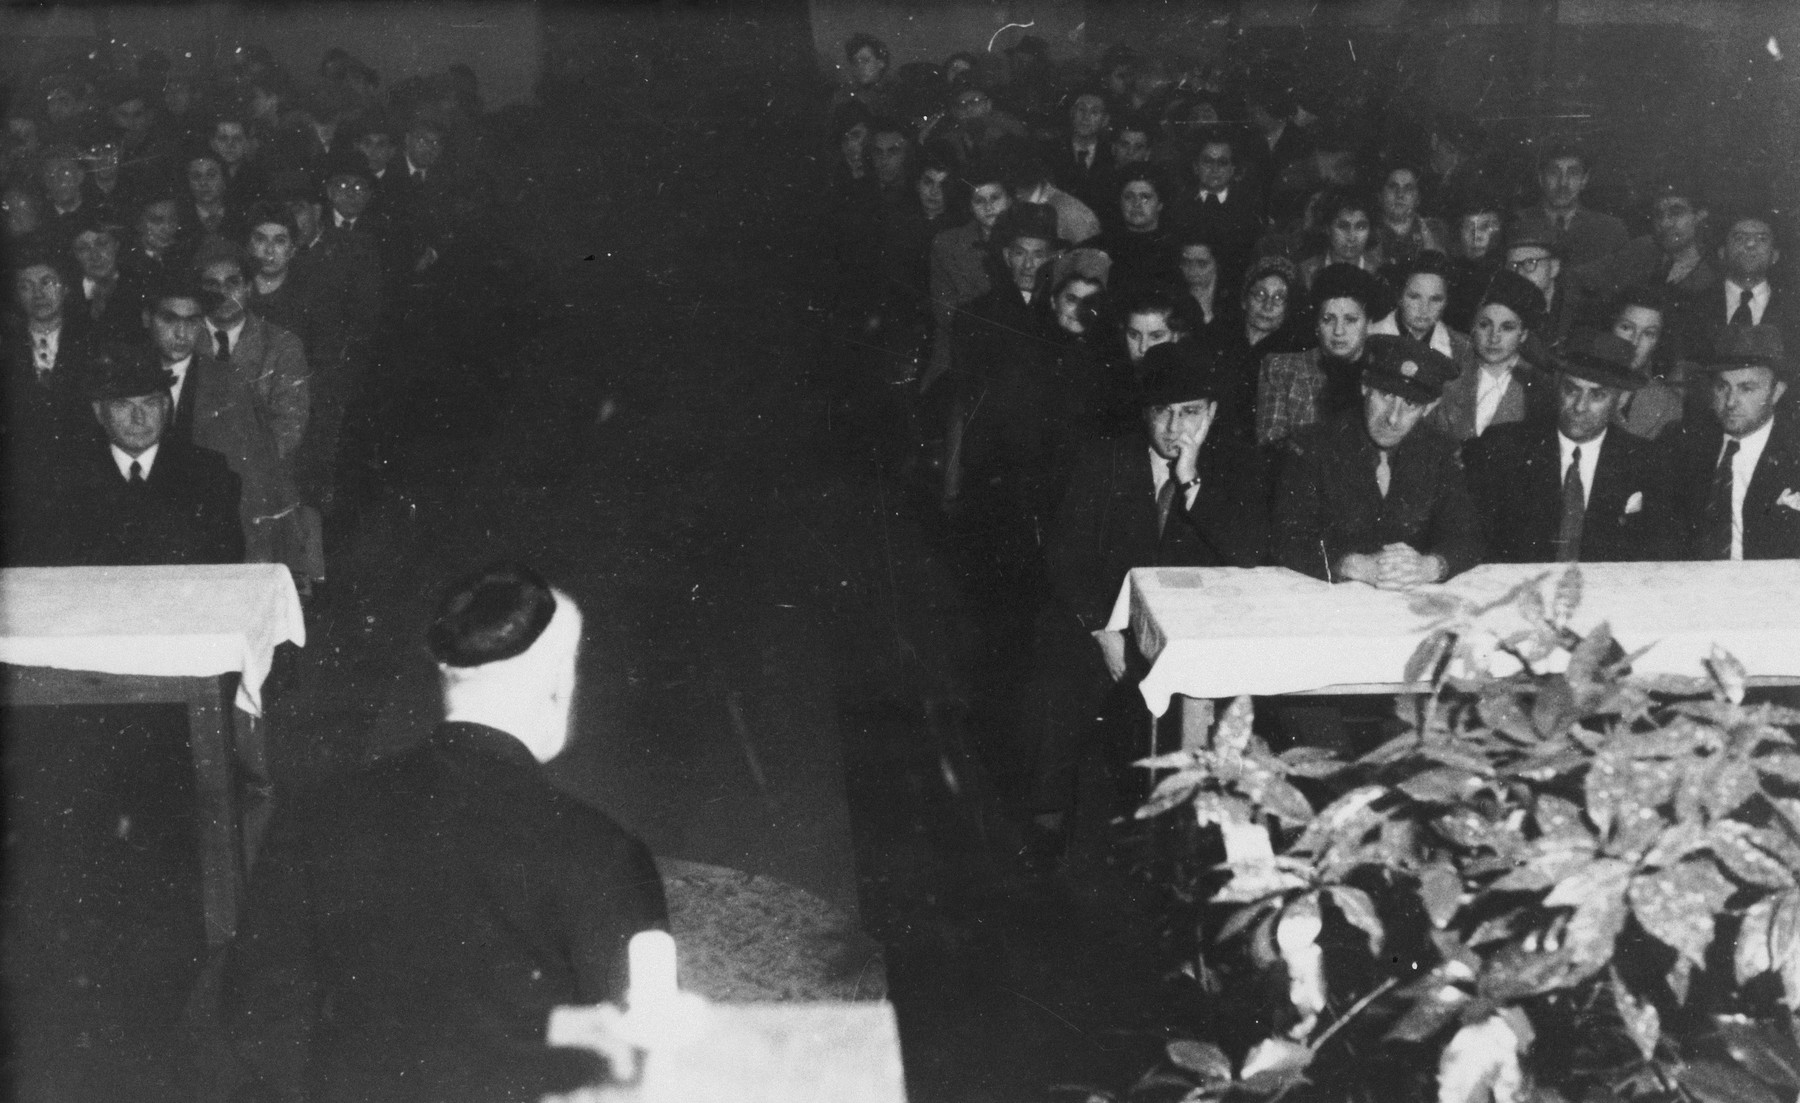 Rabbi Leo Baeck delivers a speech at a Zionist meeting in Hannover during his three week visit to Germany in the fall of 1948.